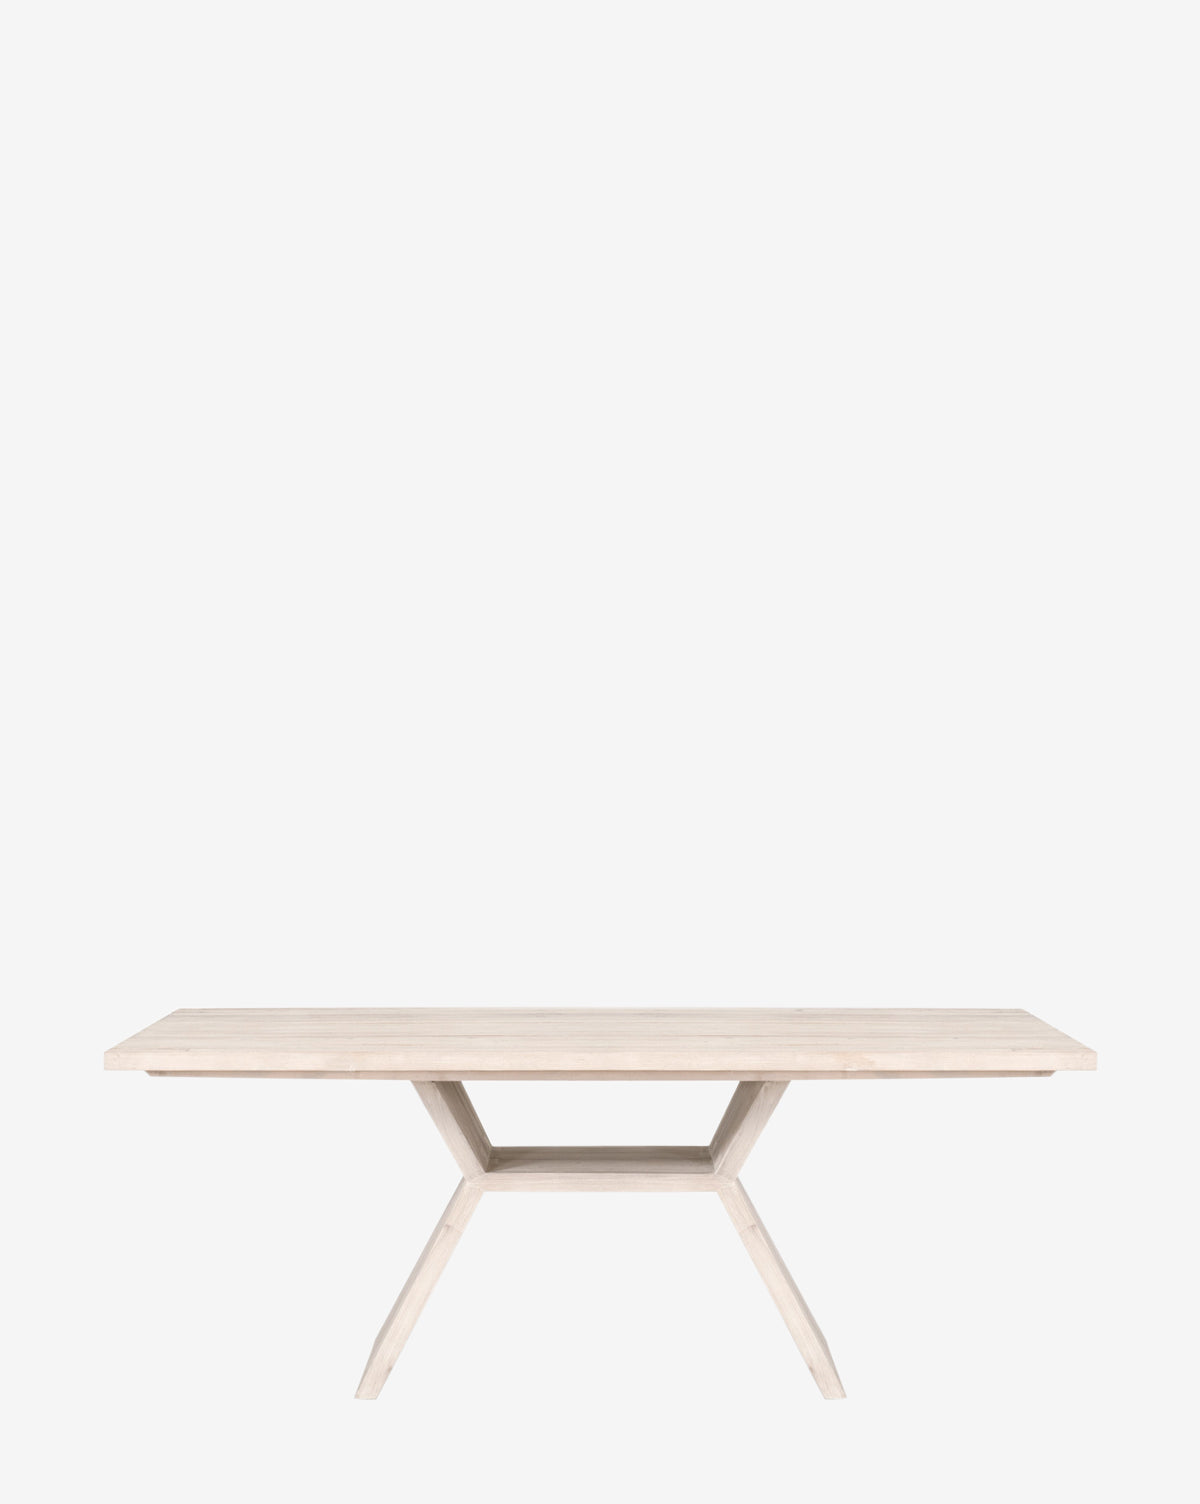 Essentials For Living, Sylvan Dining Table